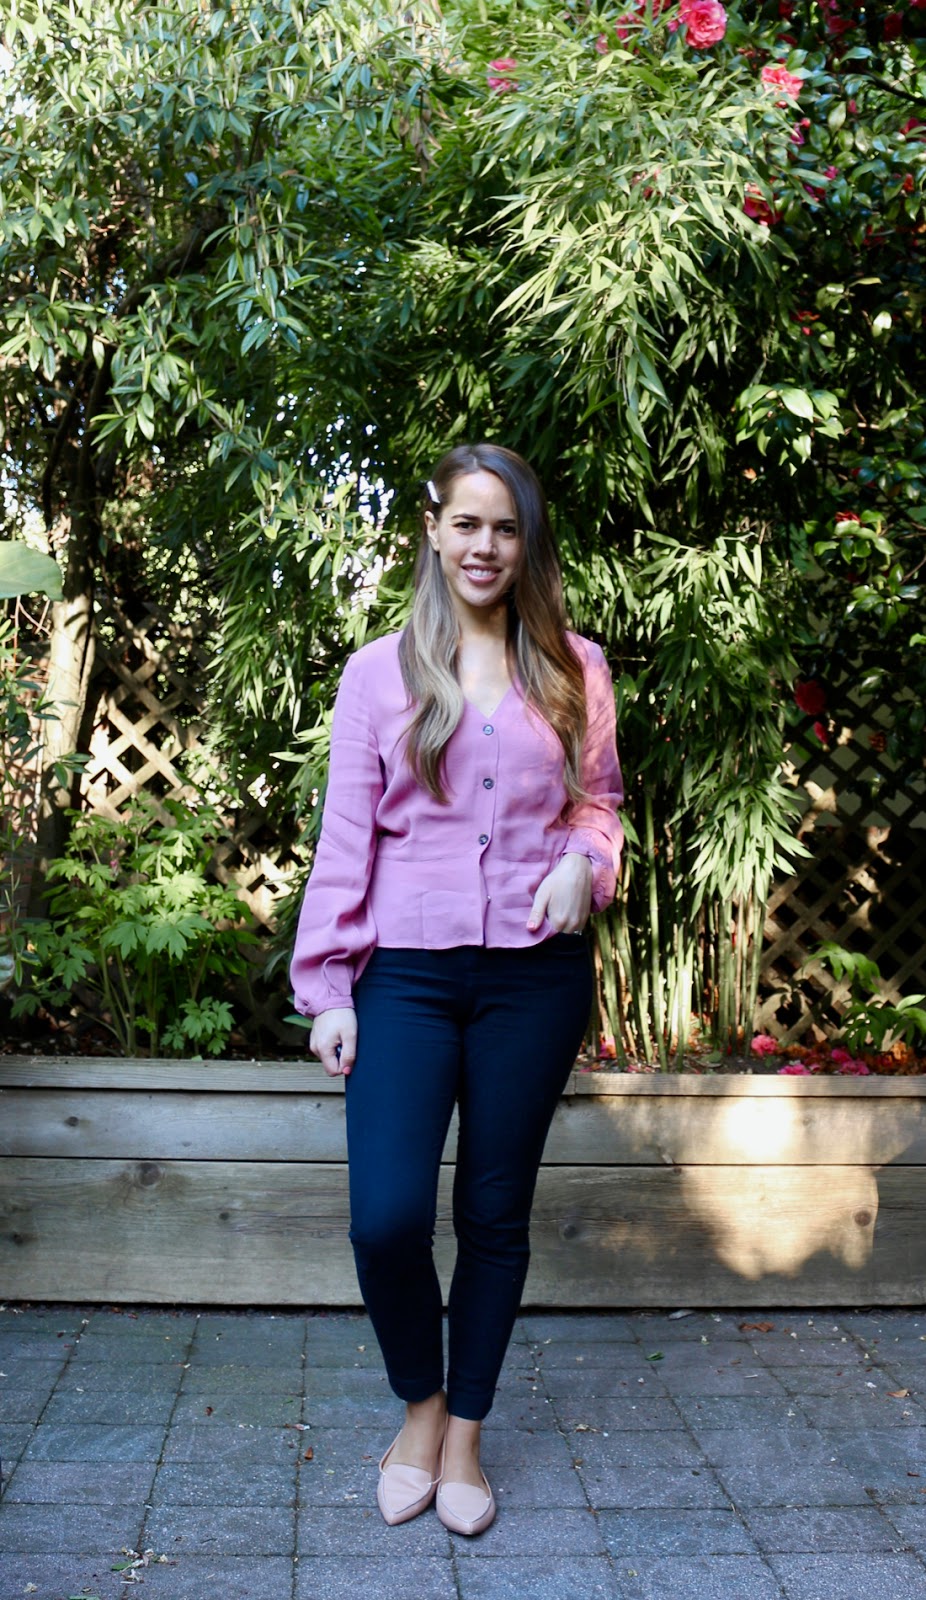 Jules in Flats - V Neck Top with Buttons and Pearl Hair Pin (Business Casual Spring Workwear on a Budget)